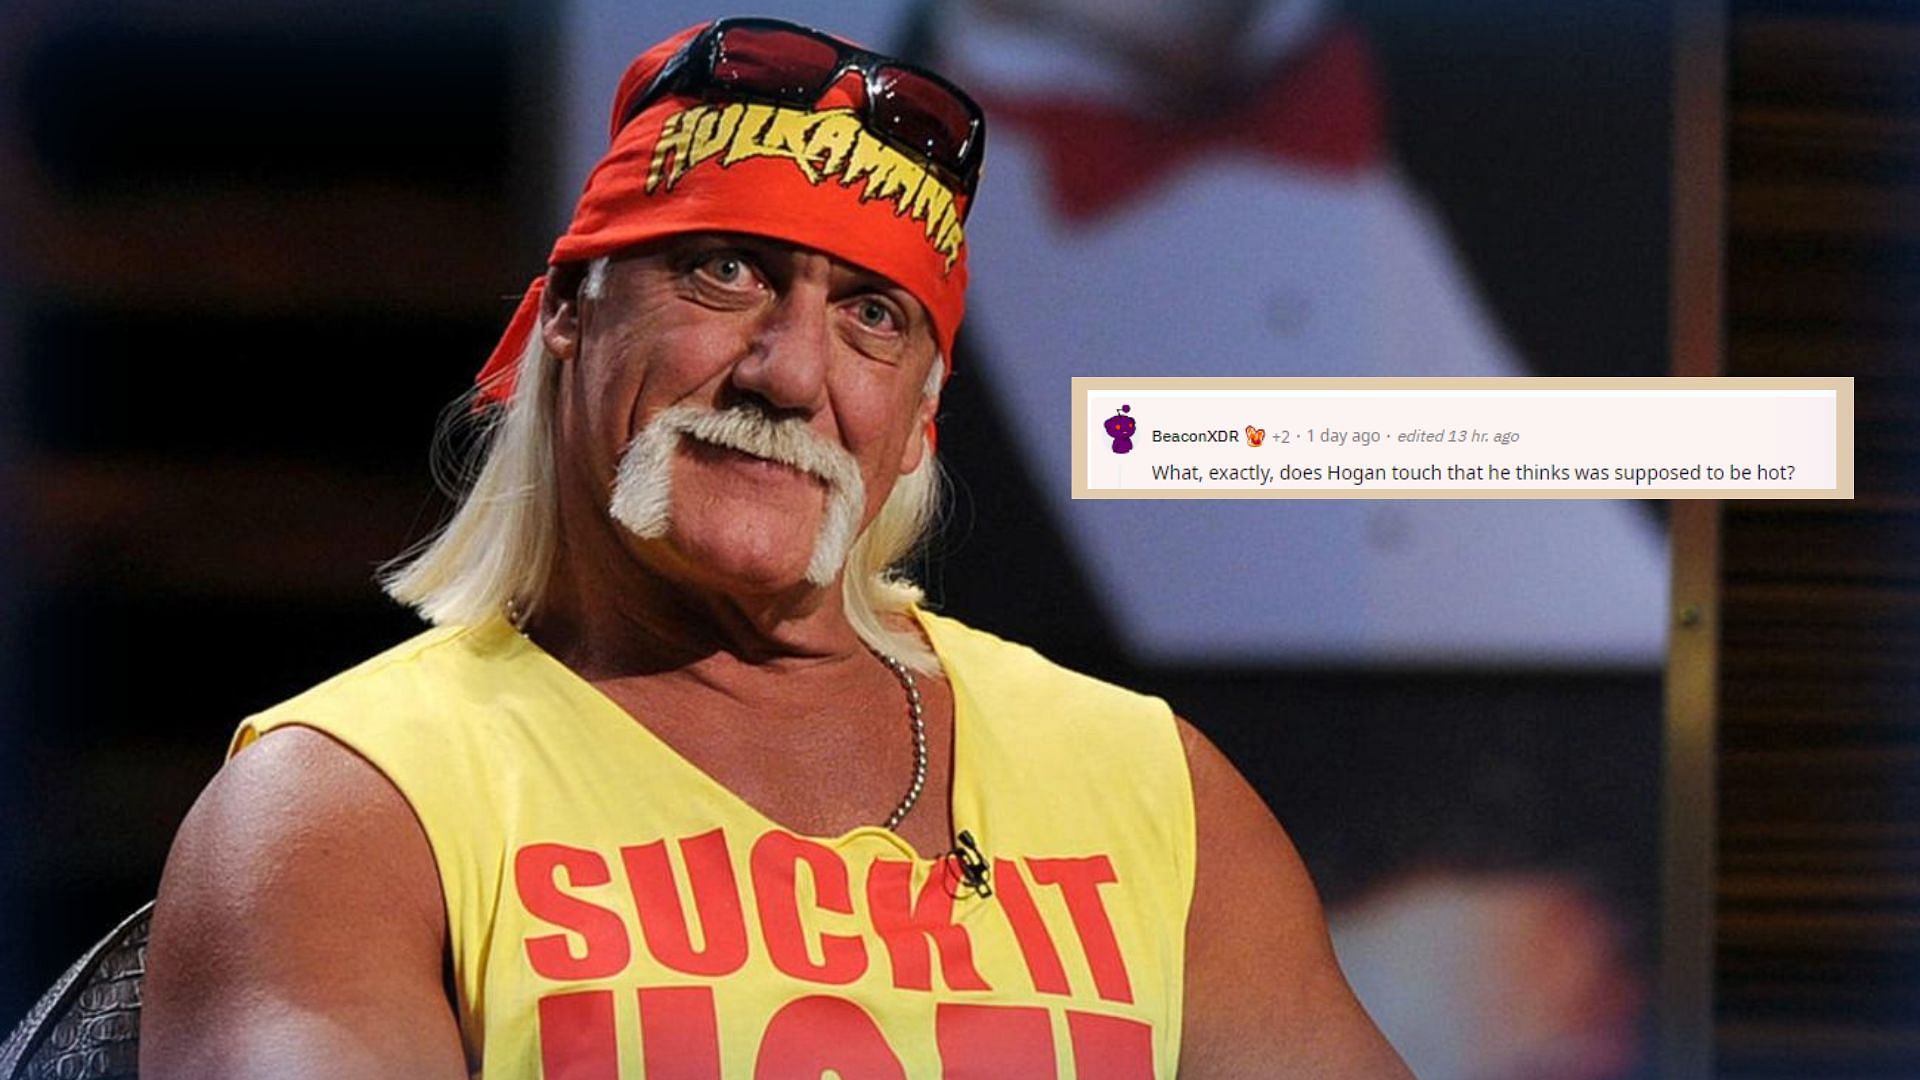 Hulk Hogan was often involved in several controversial angles